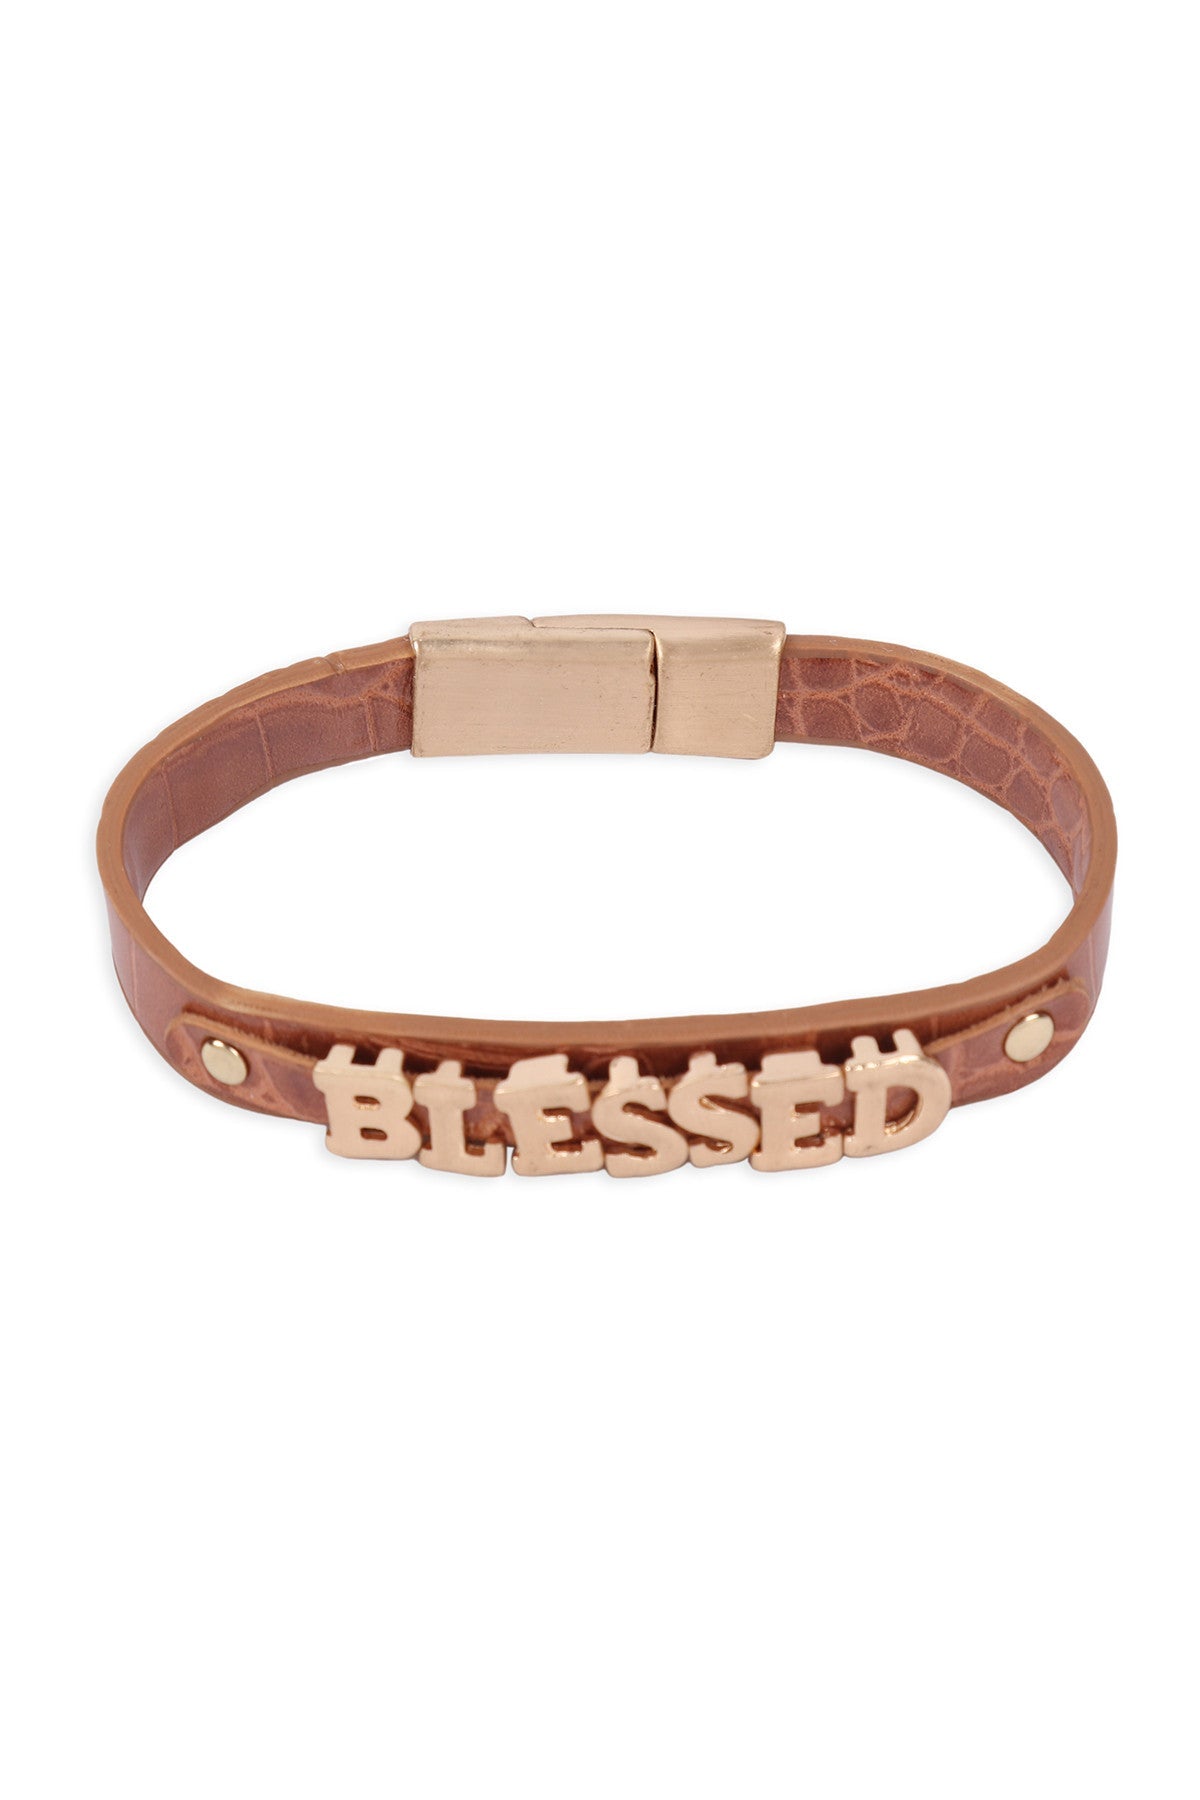 "BLESSED" LEATHER PERSONALIZED MAGNETIC BRACELET